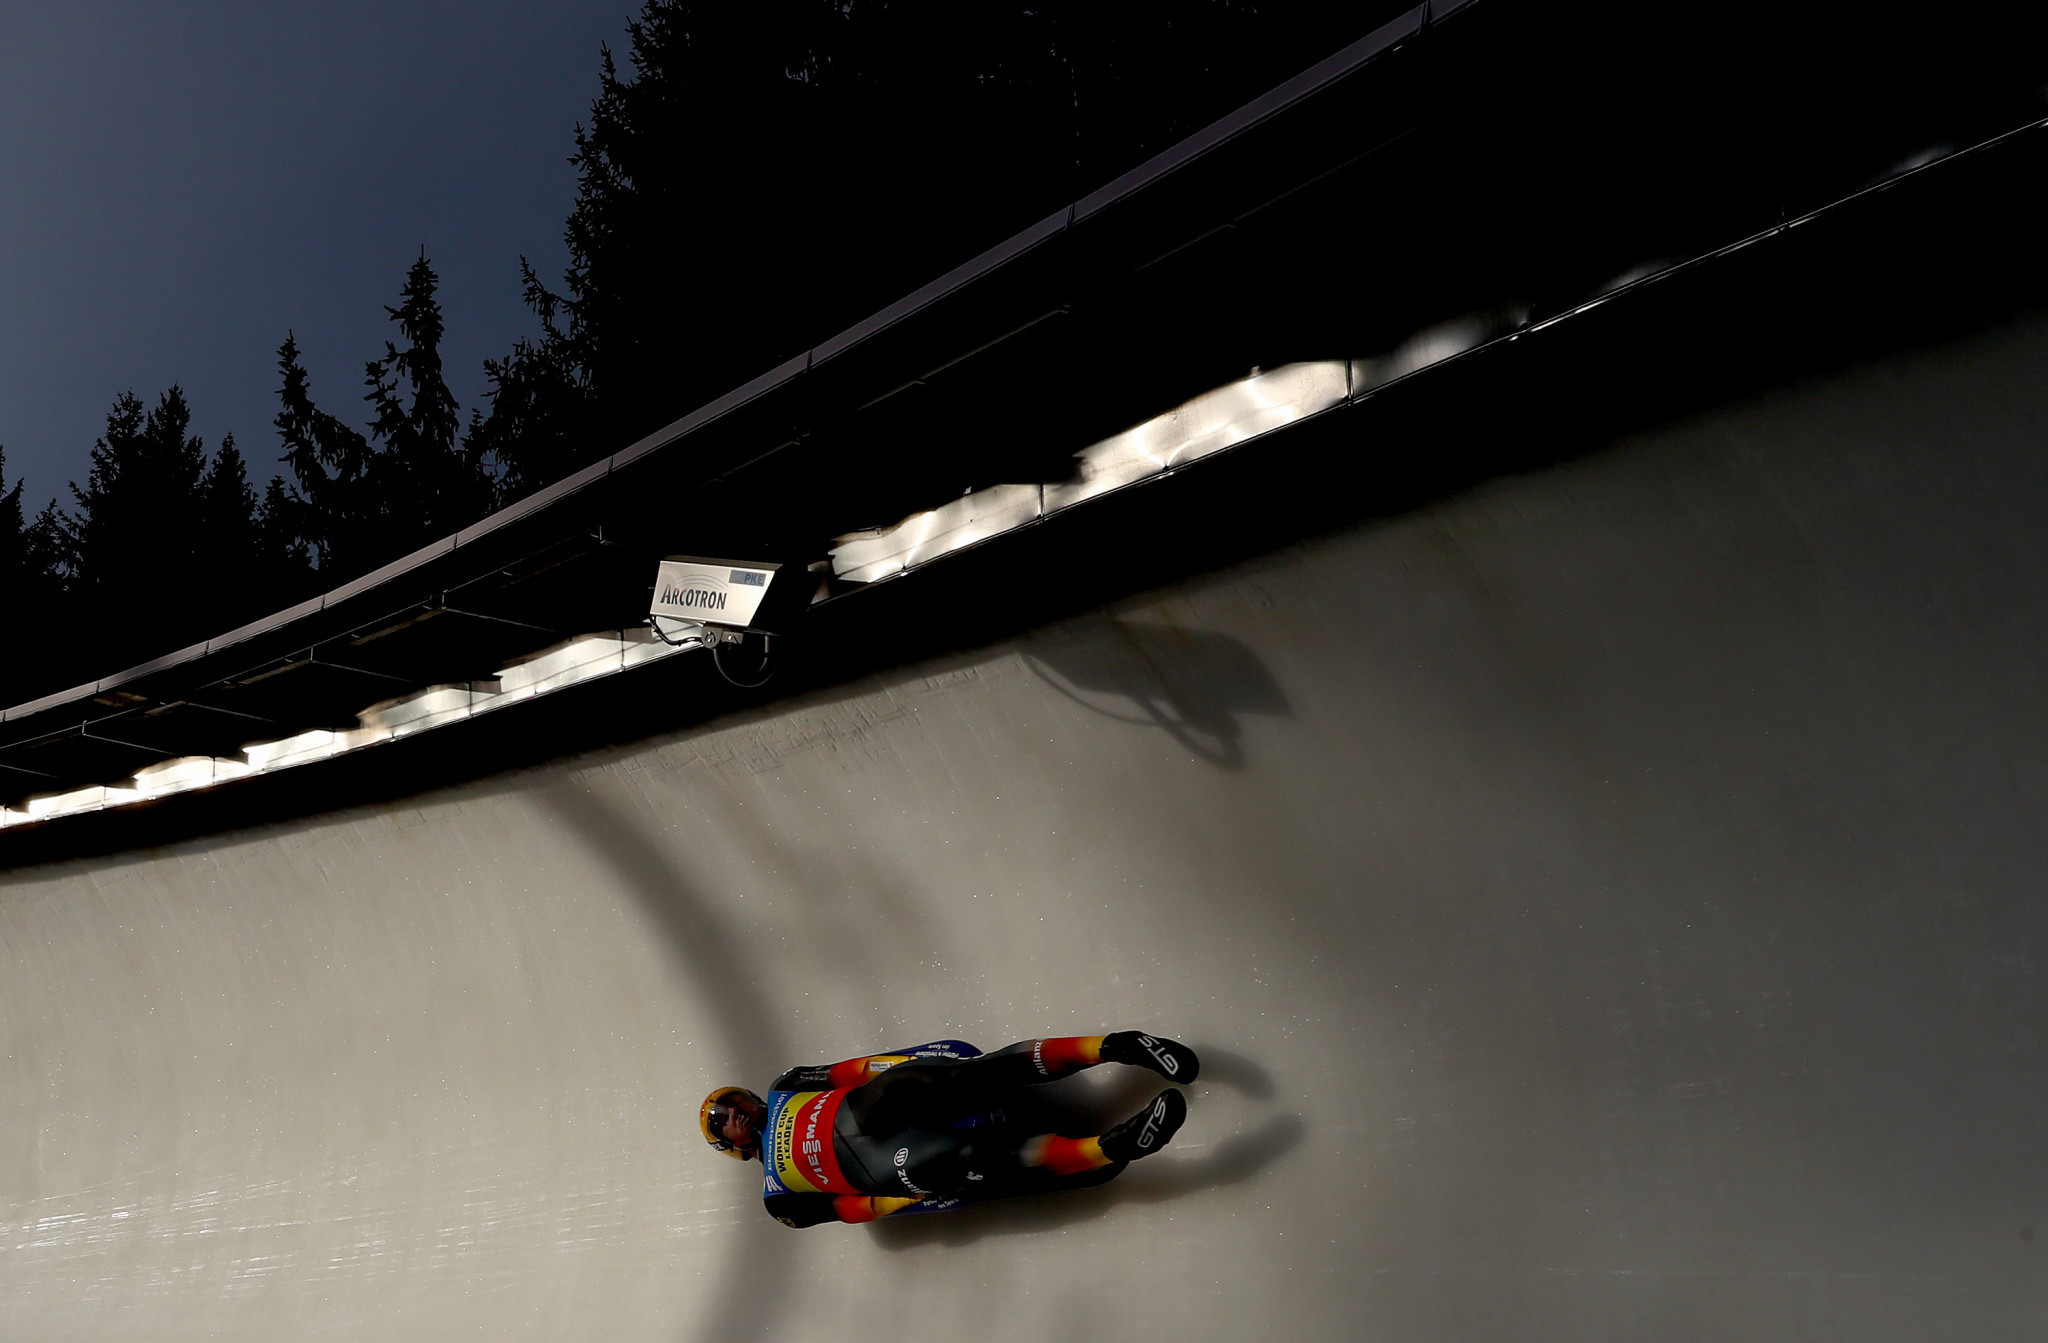 Loch continues impressive start to FIL Luge World Cup season after victory in Altenburg